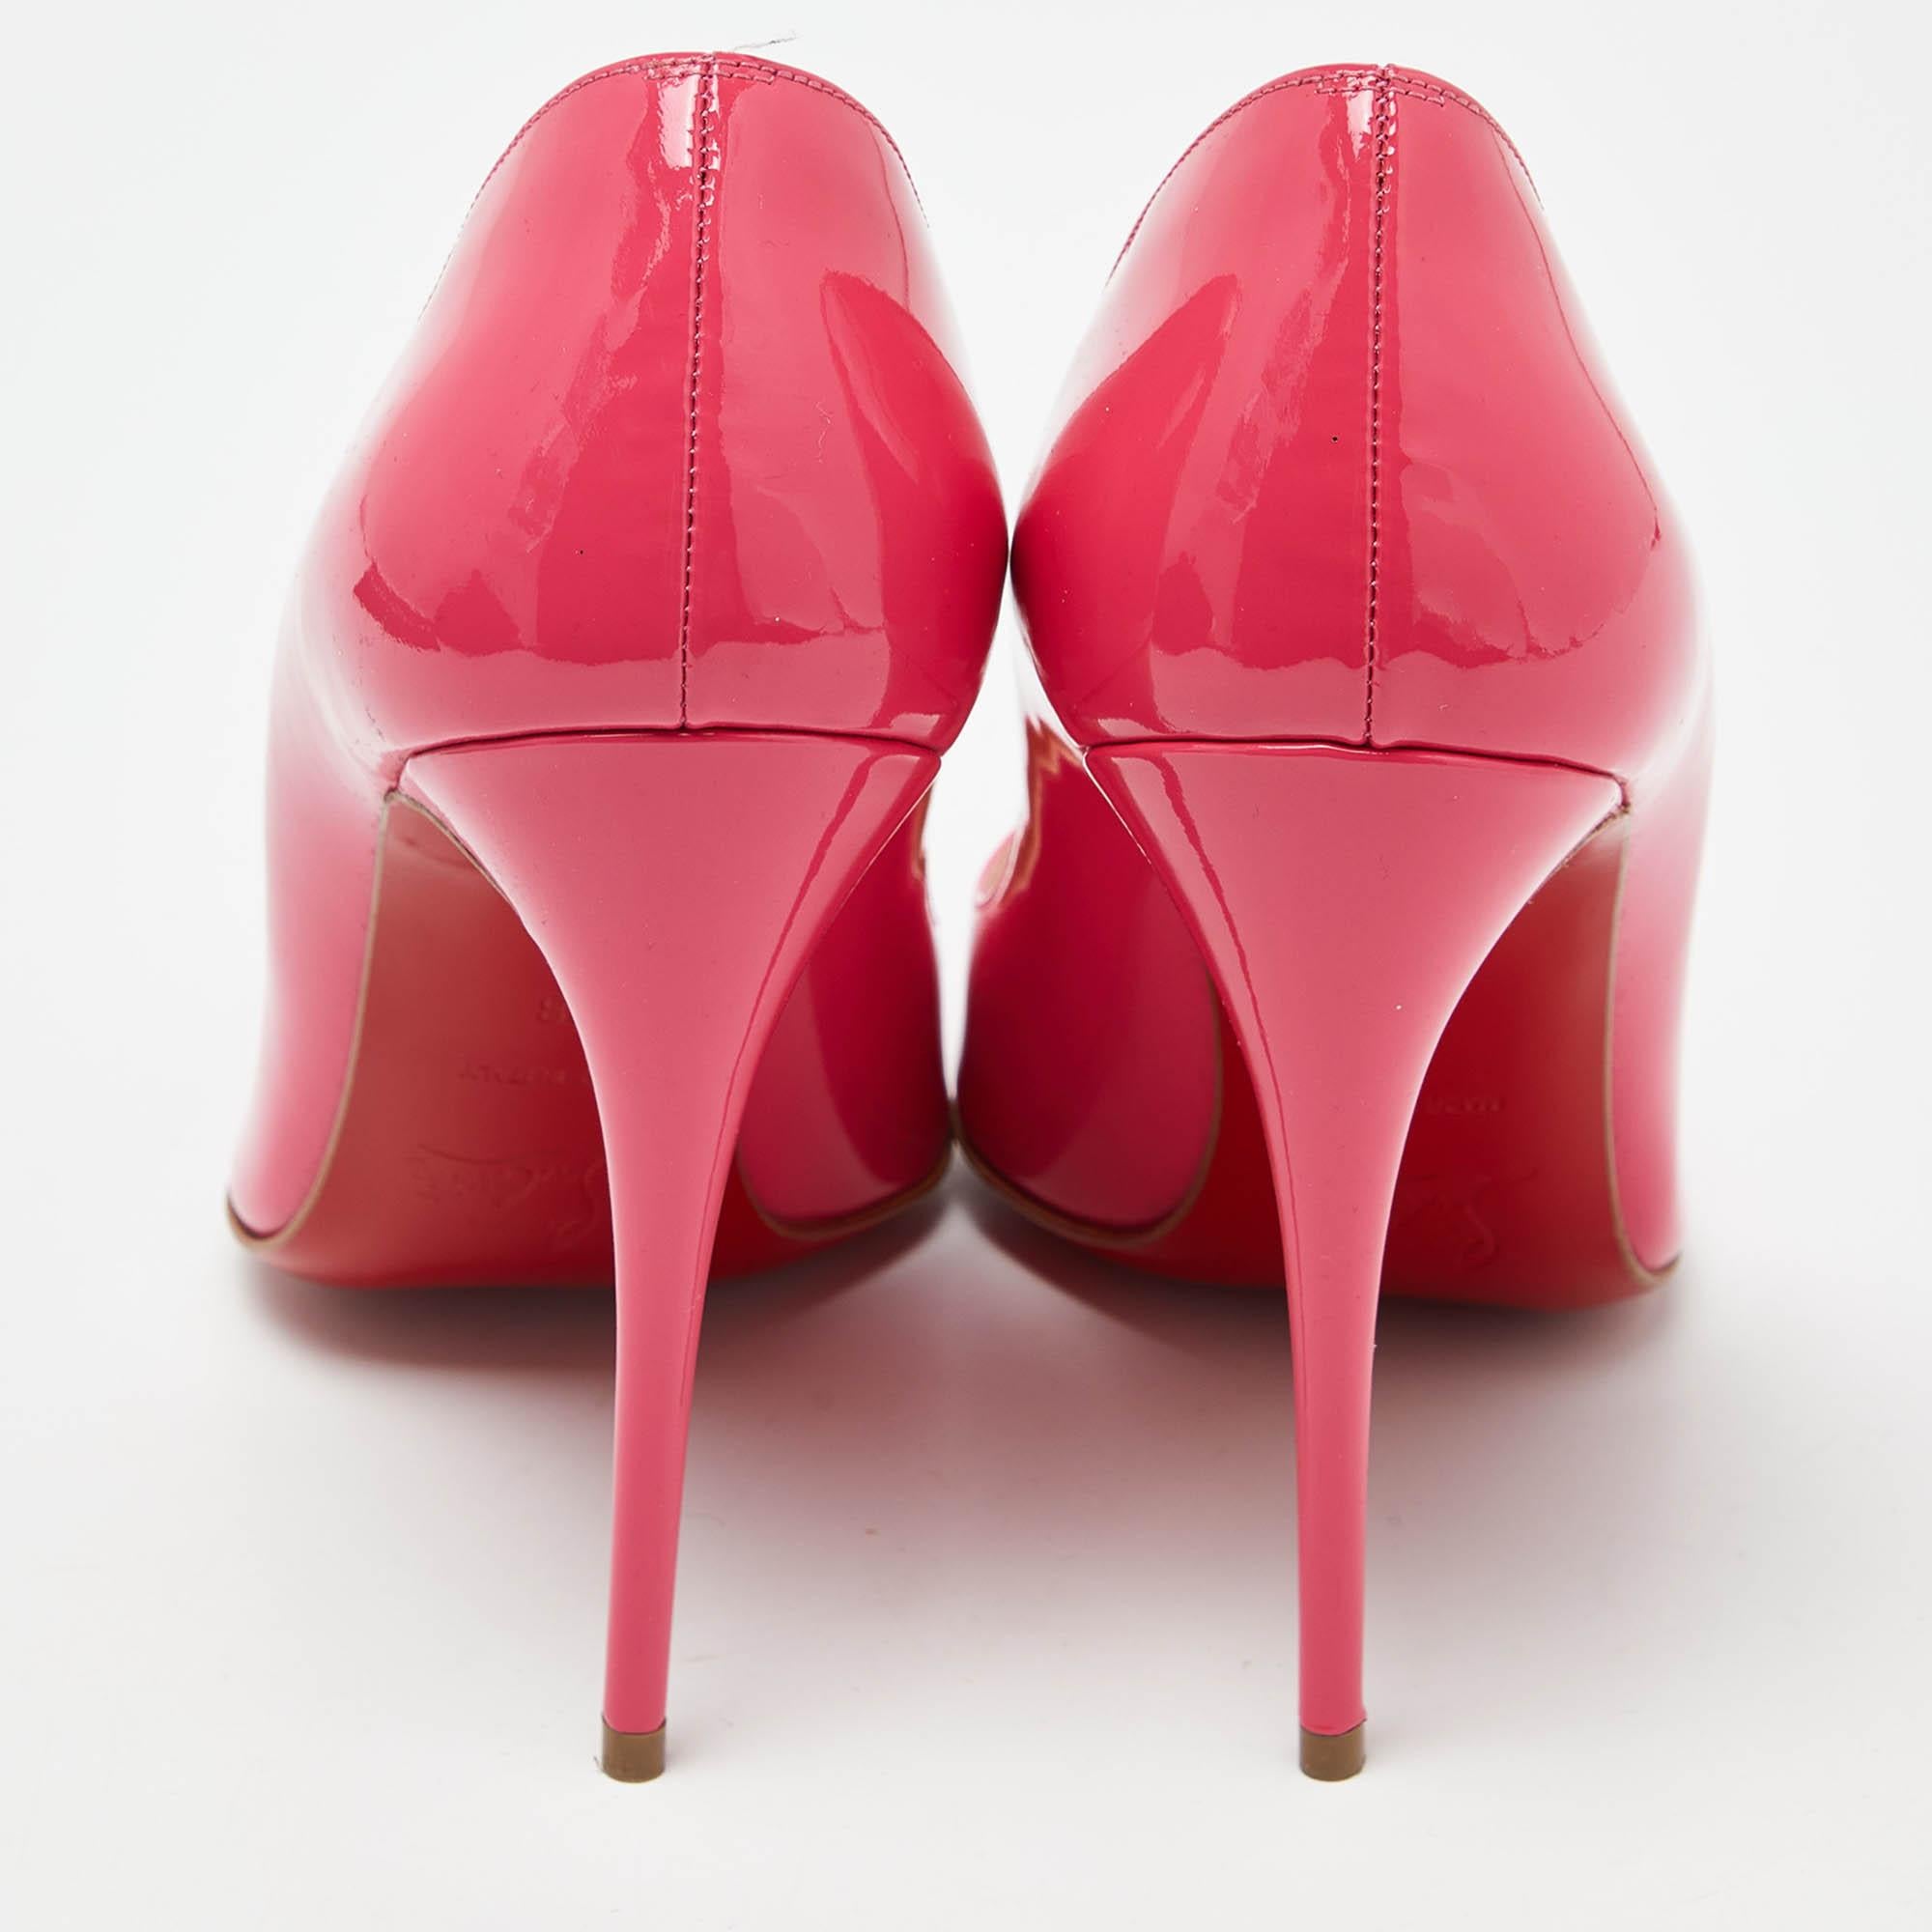 Women's Christian Louboutin Pink Patent Leather Pigalle Pumps Size 38 For Sale